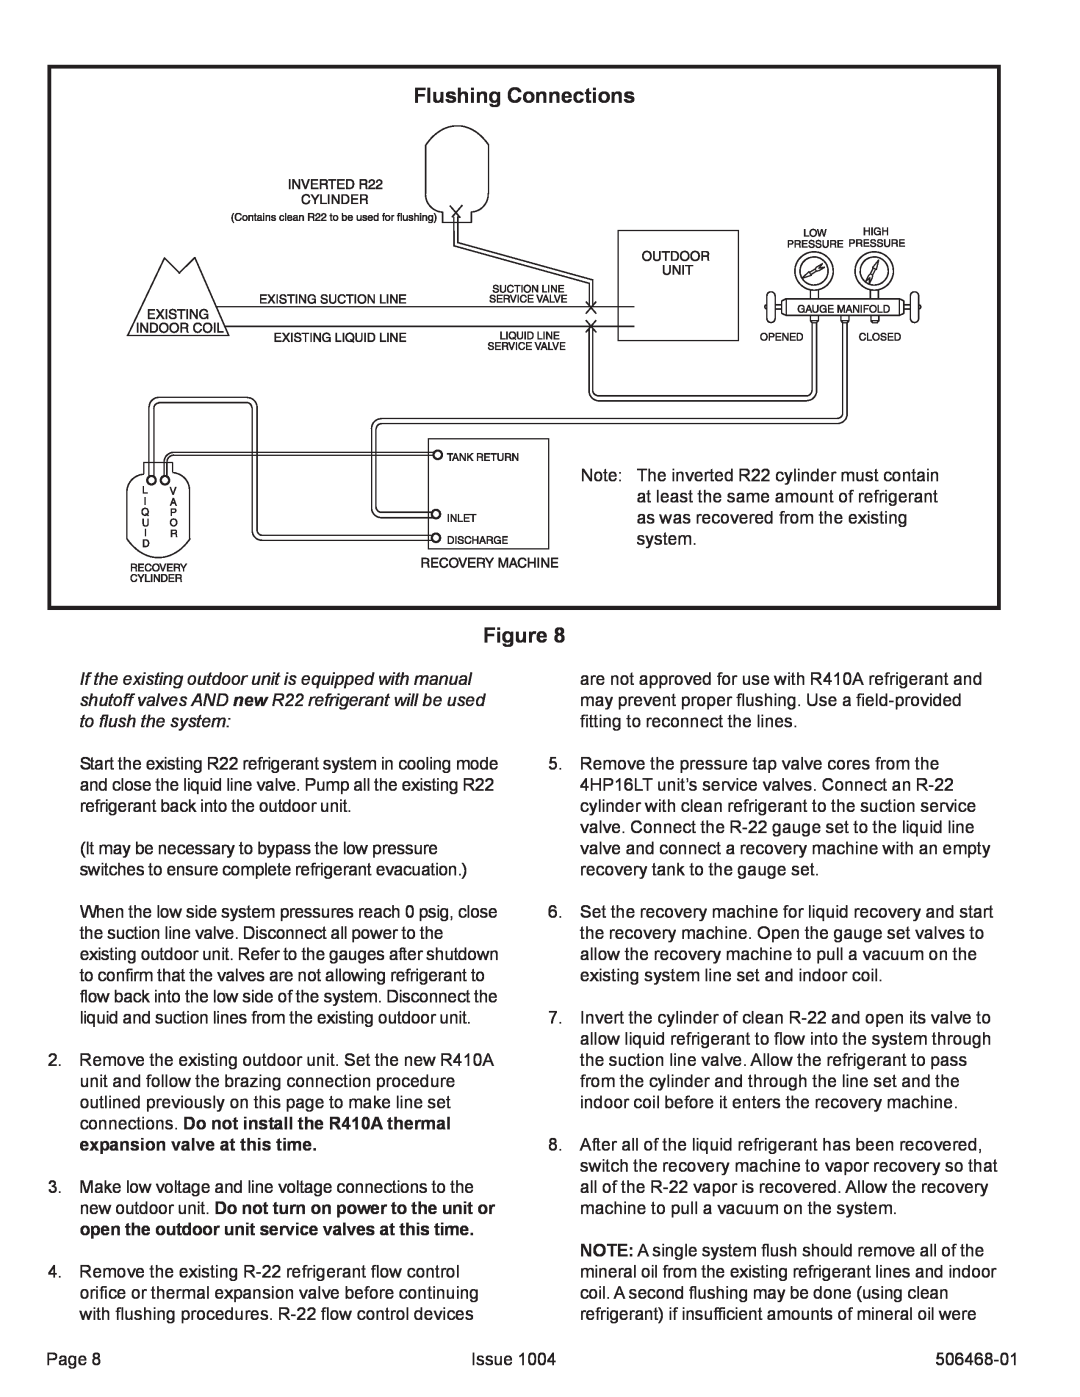 Allied Air Enterprises 4HP16LT manual Flushing Connections 